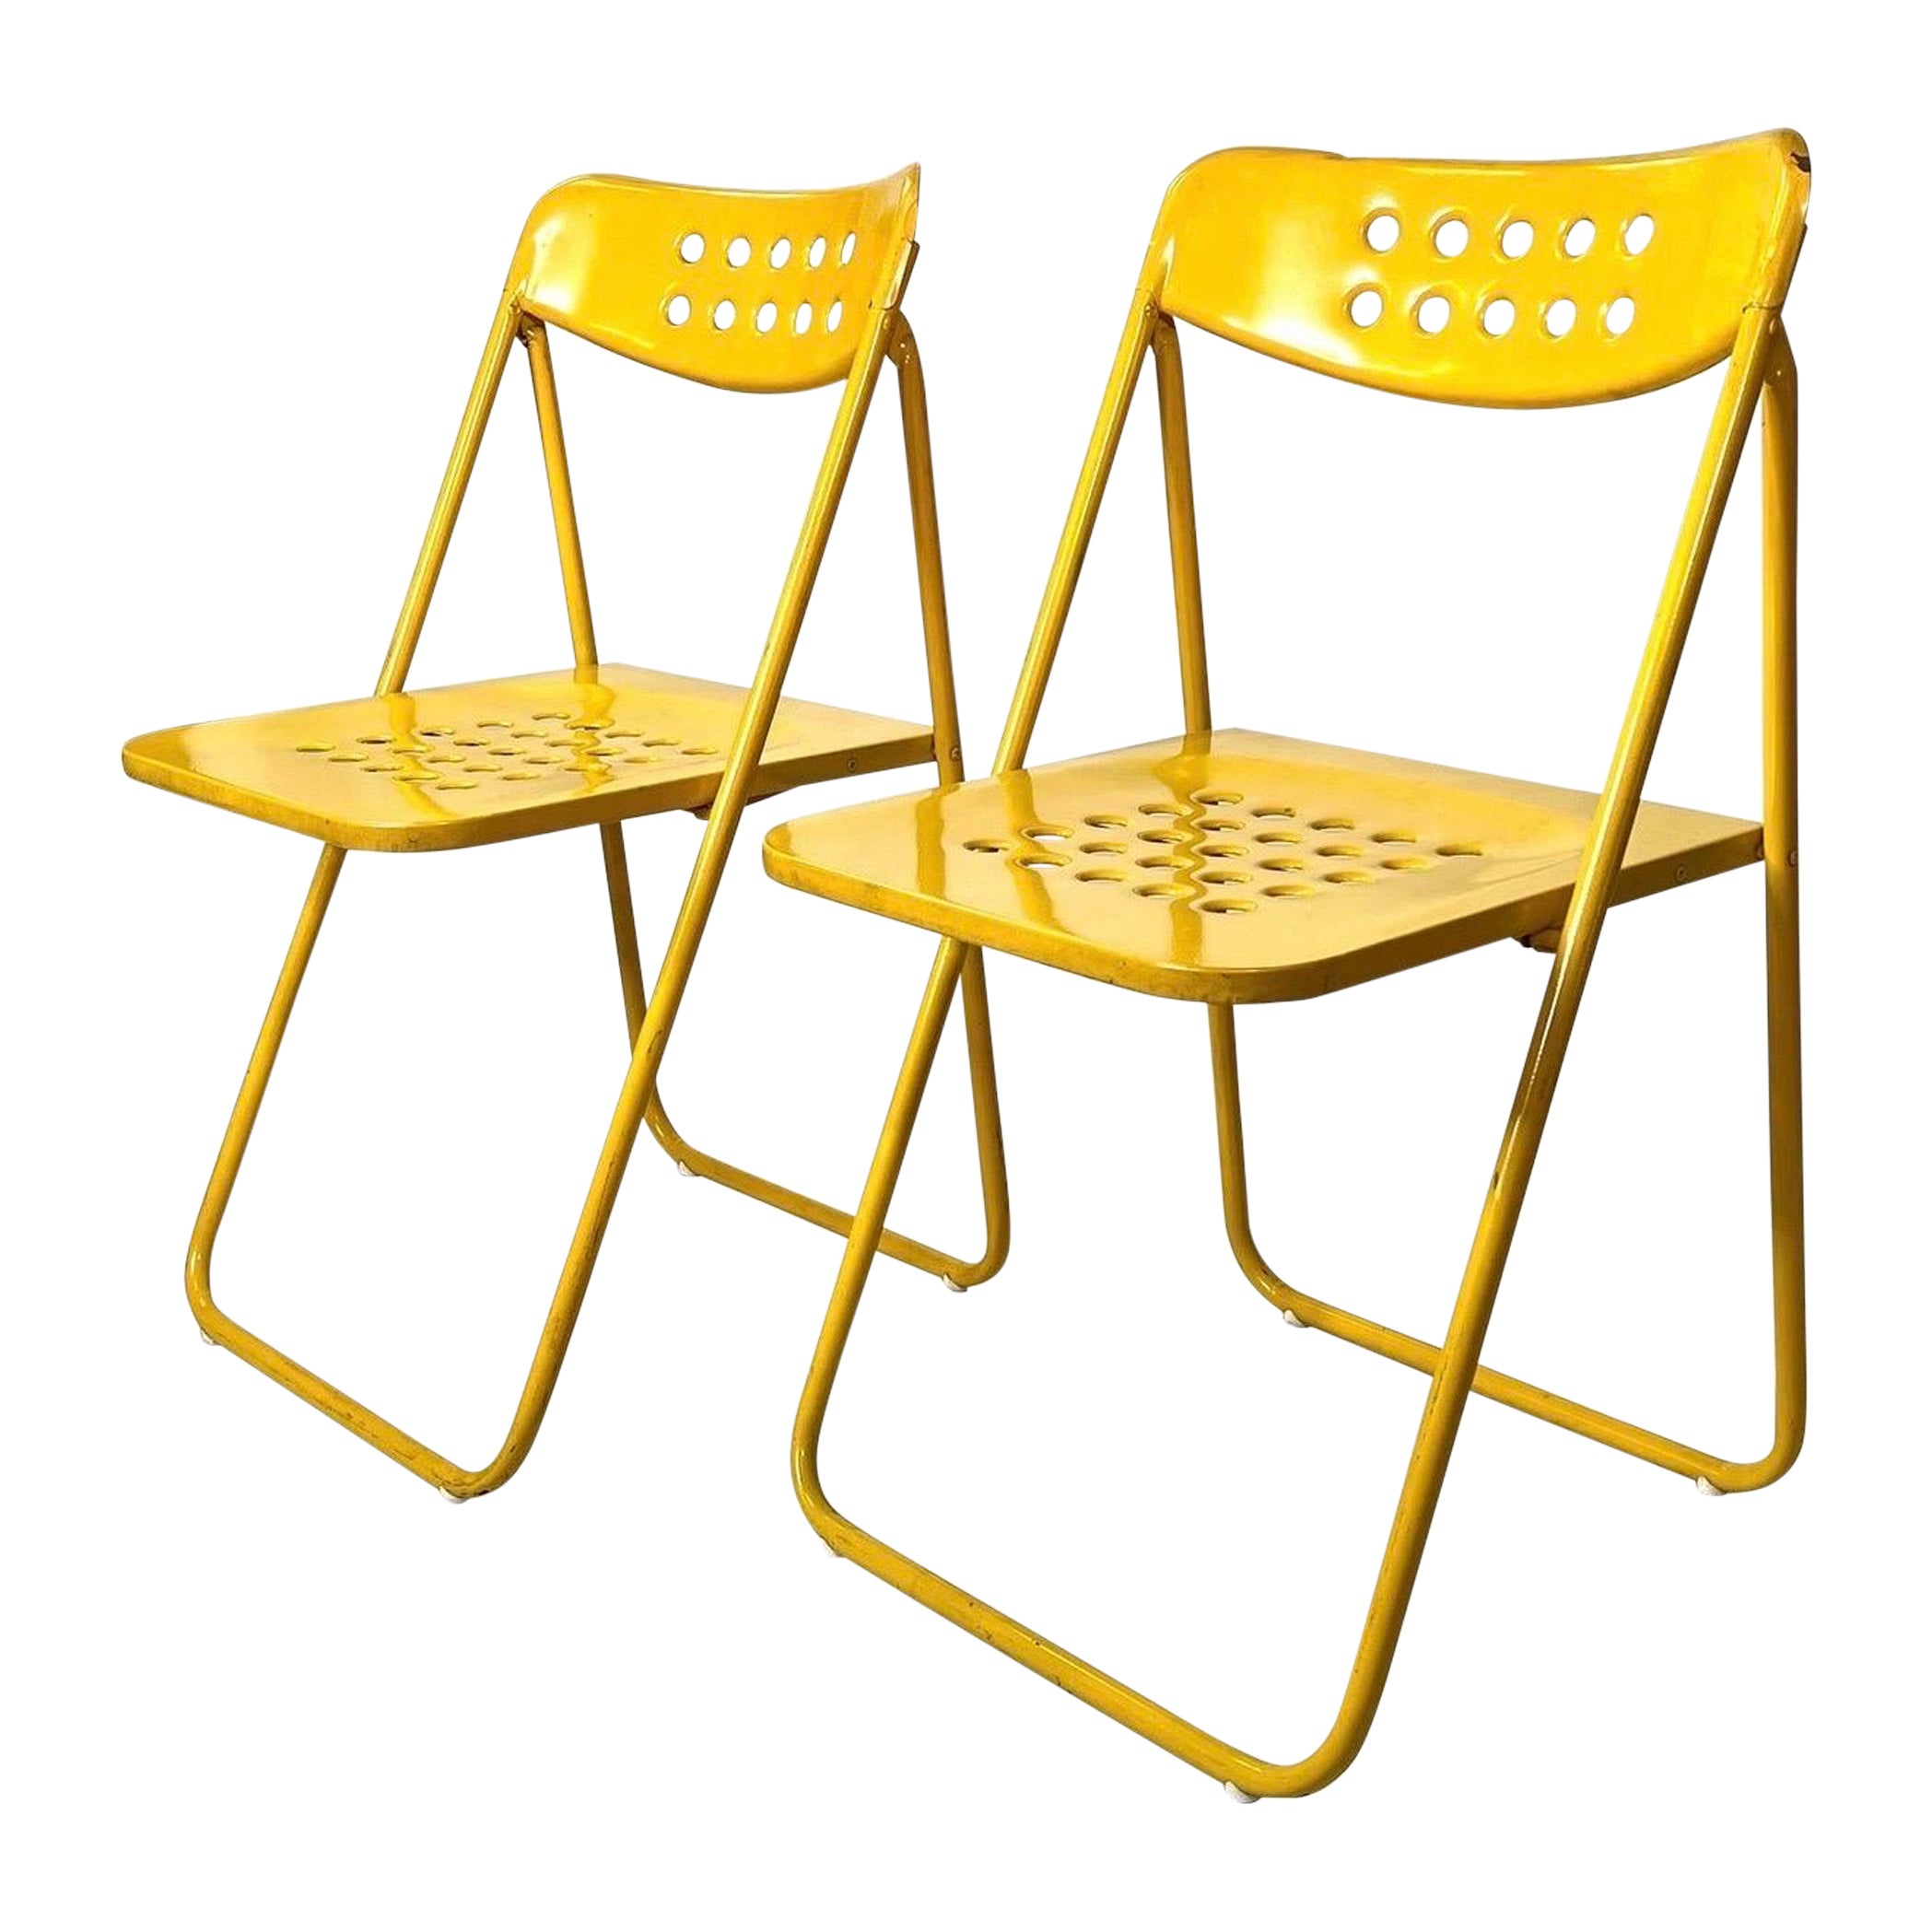 Vintage Yellow Industrial Modern Folding Chairs - a Pair For Sale